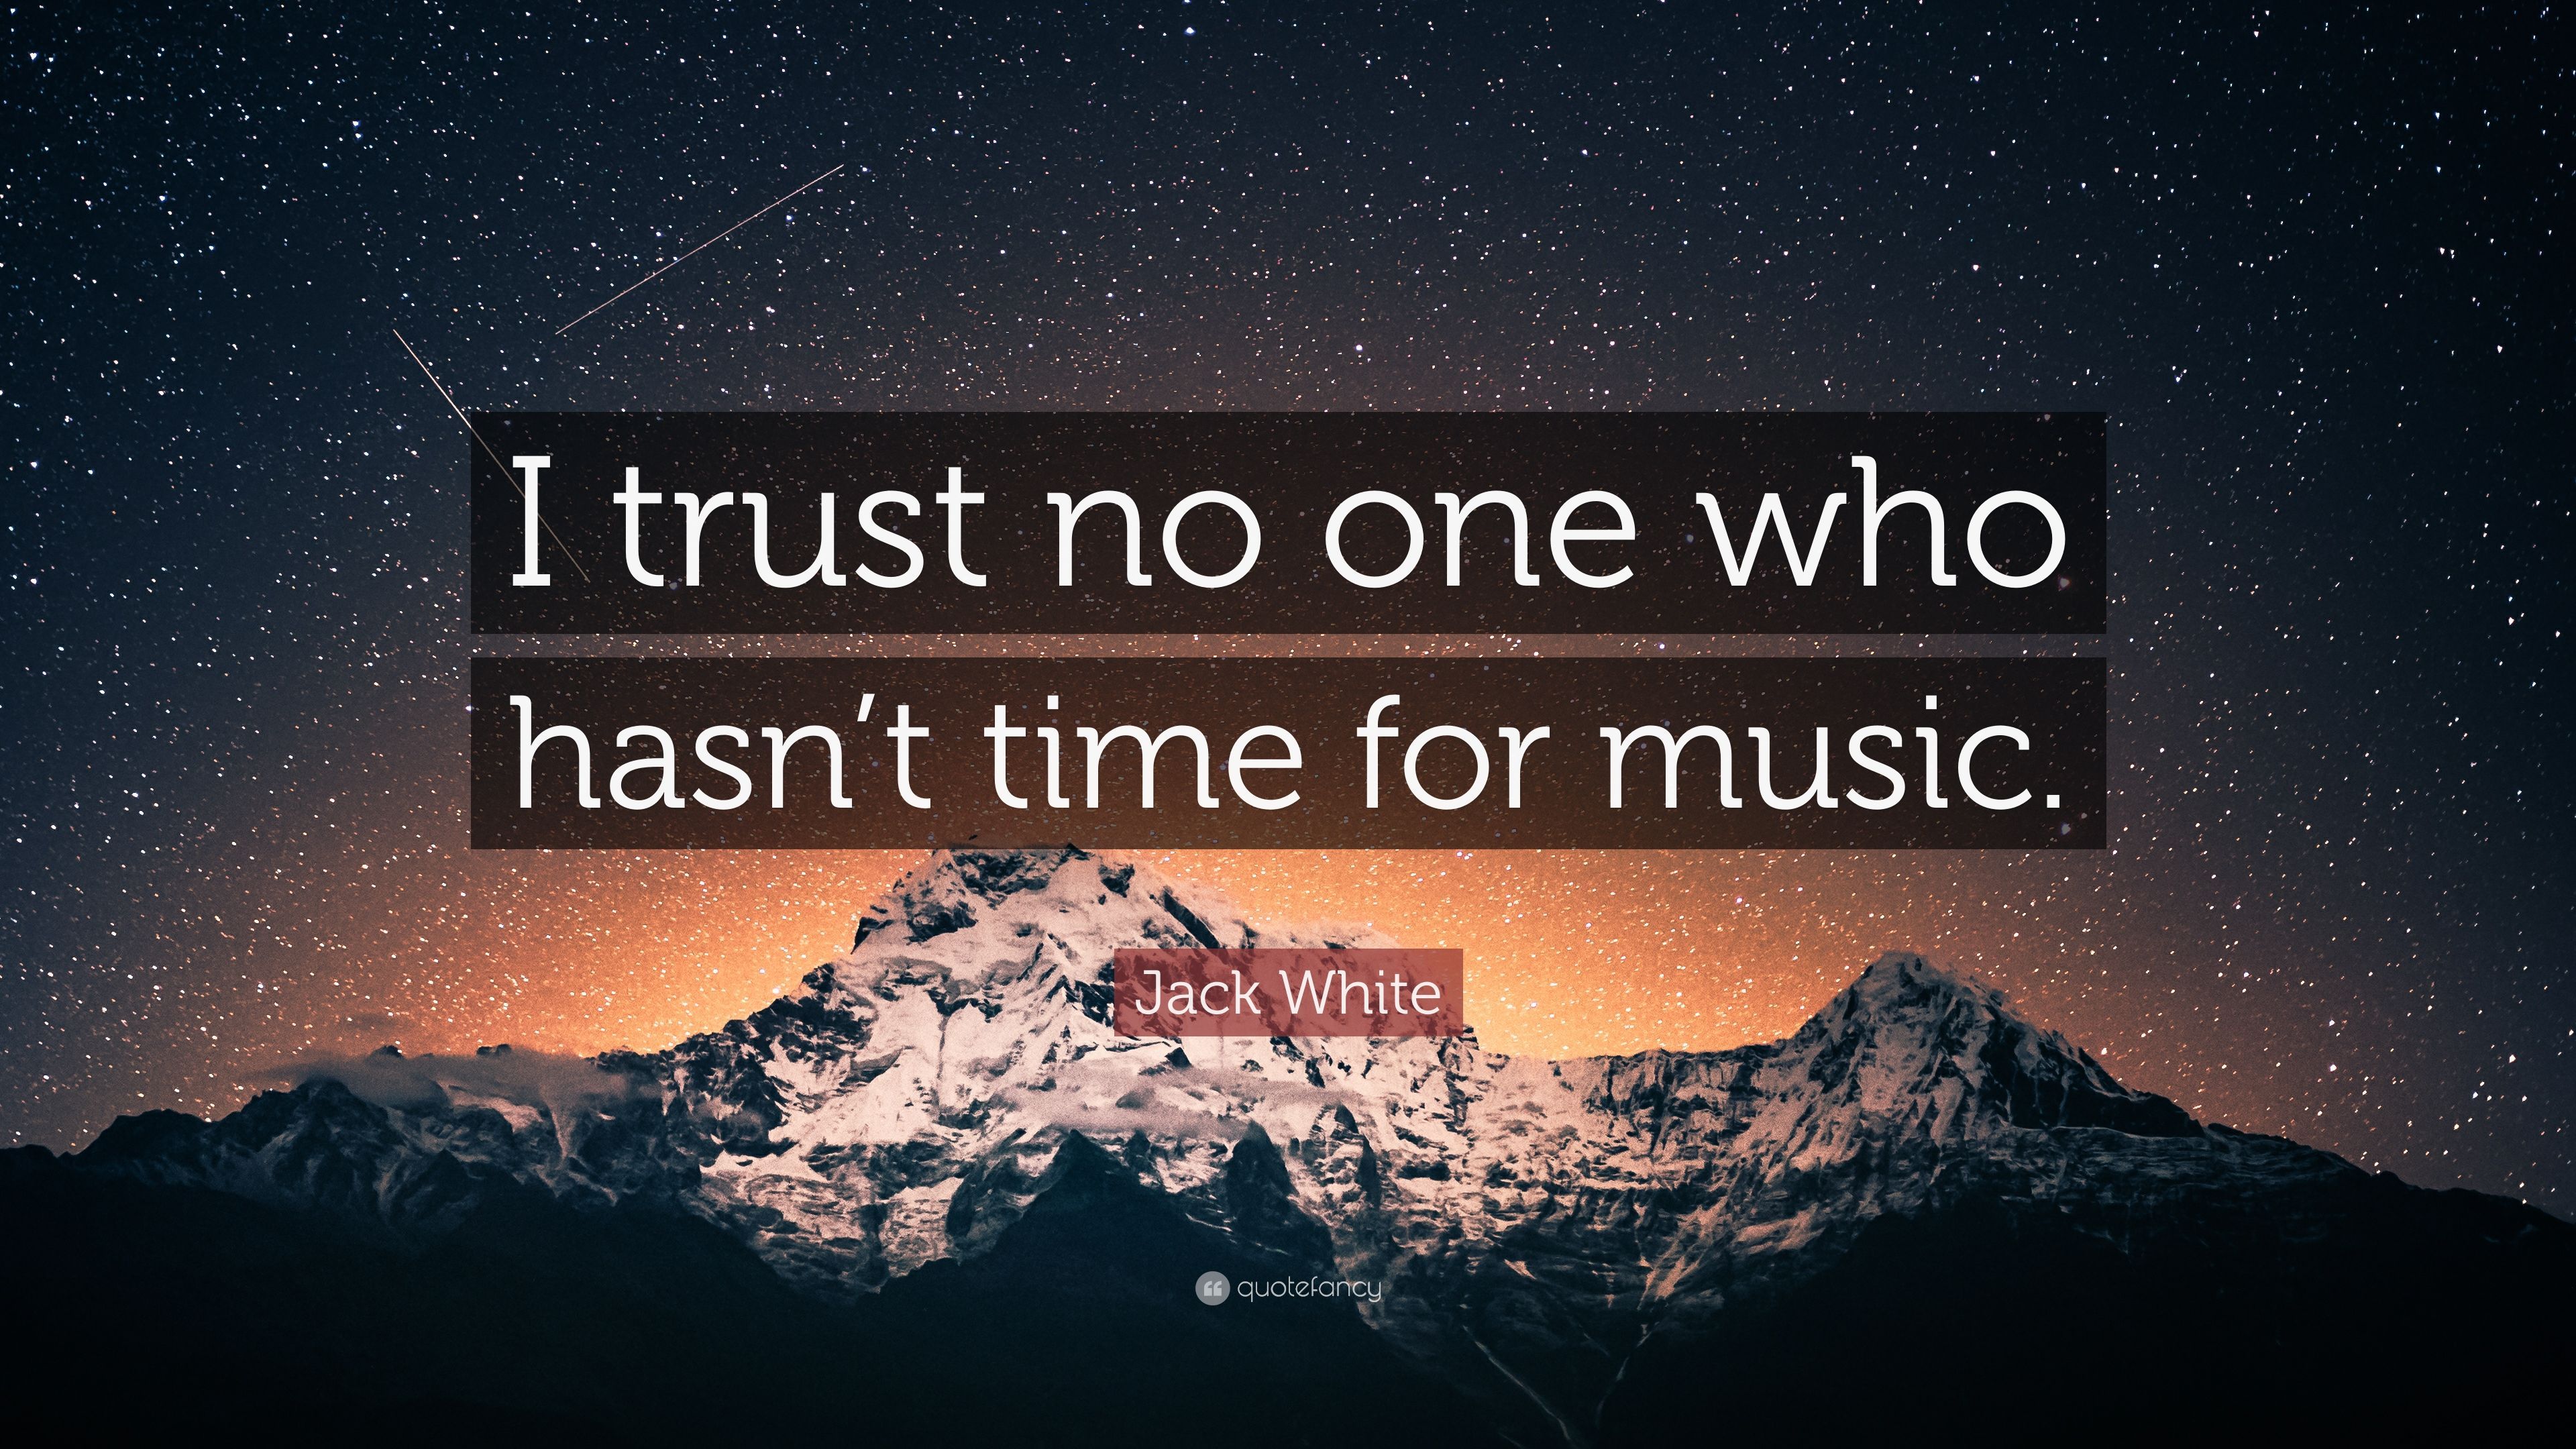 Jack White Quote: “I trust no one who hasn't time for music.”